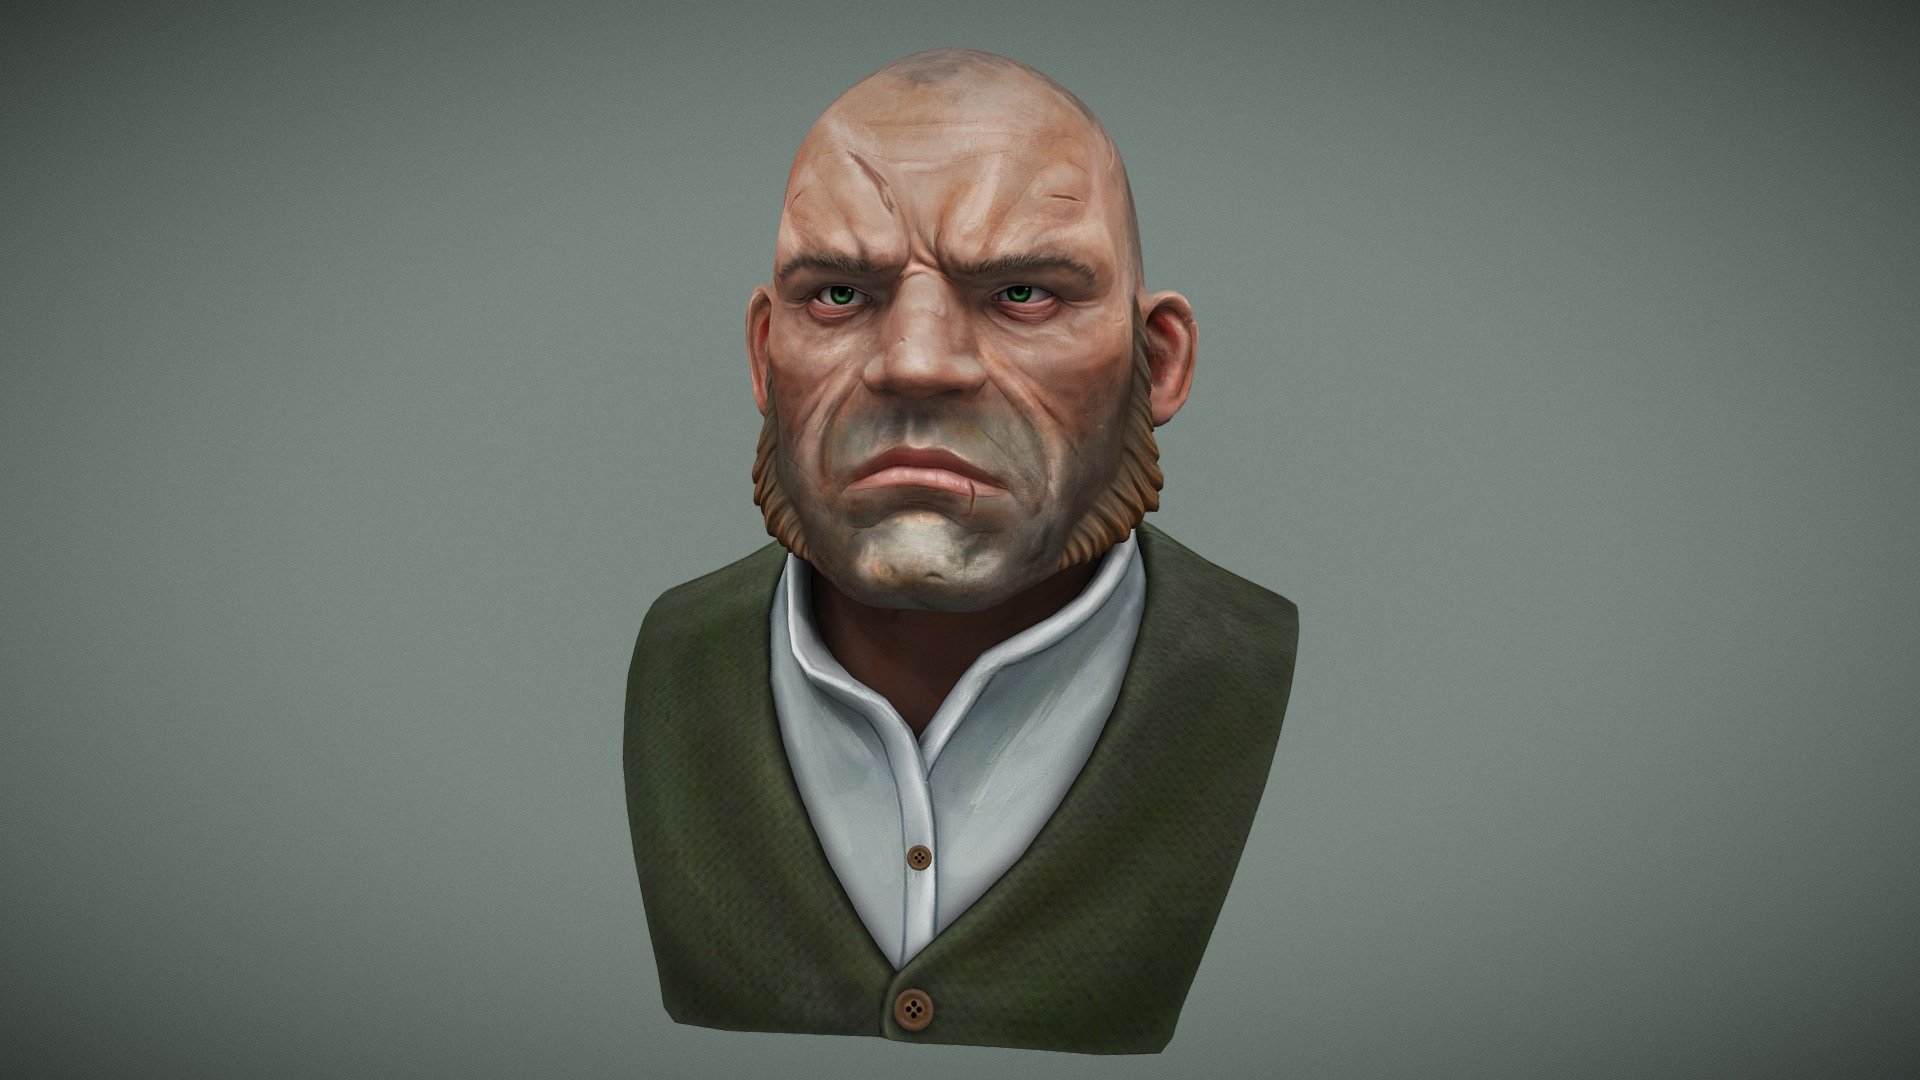 A bust inspired from the concept art of a thug character from the game Dishonored. The goal was to make stylized and similar in style to the concept. This project helped me improve on my own hand painting techniques, as well as my understanding of lighting and shadows.

Artstation: https://www.artstation.com/artwork/k4lVay - Dishonored Thug Bust - 3D model by Guillaume Lemay (@lemayguillaume3d) 3d model